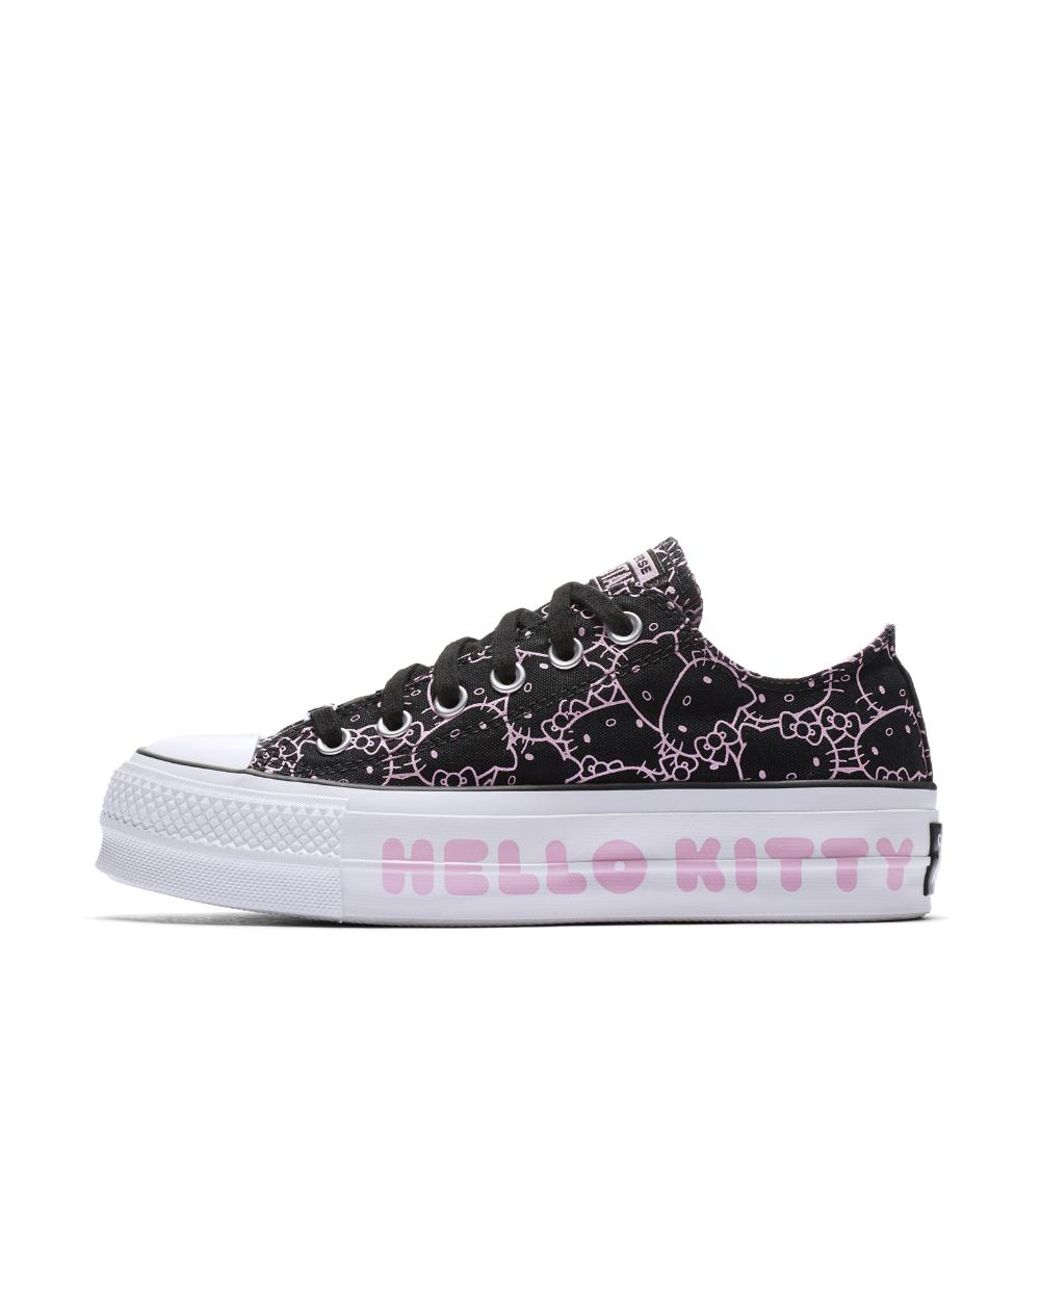 Converse X Hello Kitty Chuck Taylor All Star Clean Lift Canvas Low Top  Women's Shoe in Black | Lyst